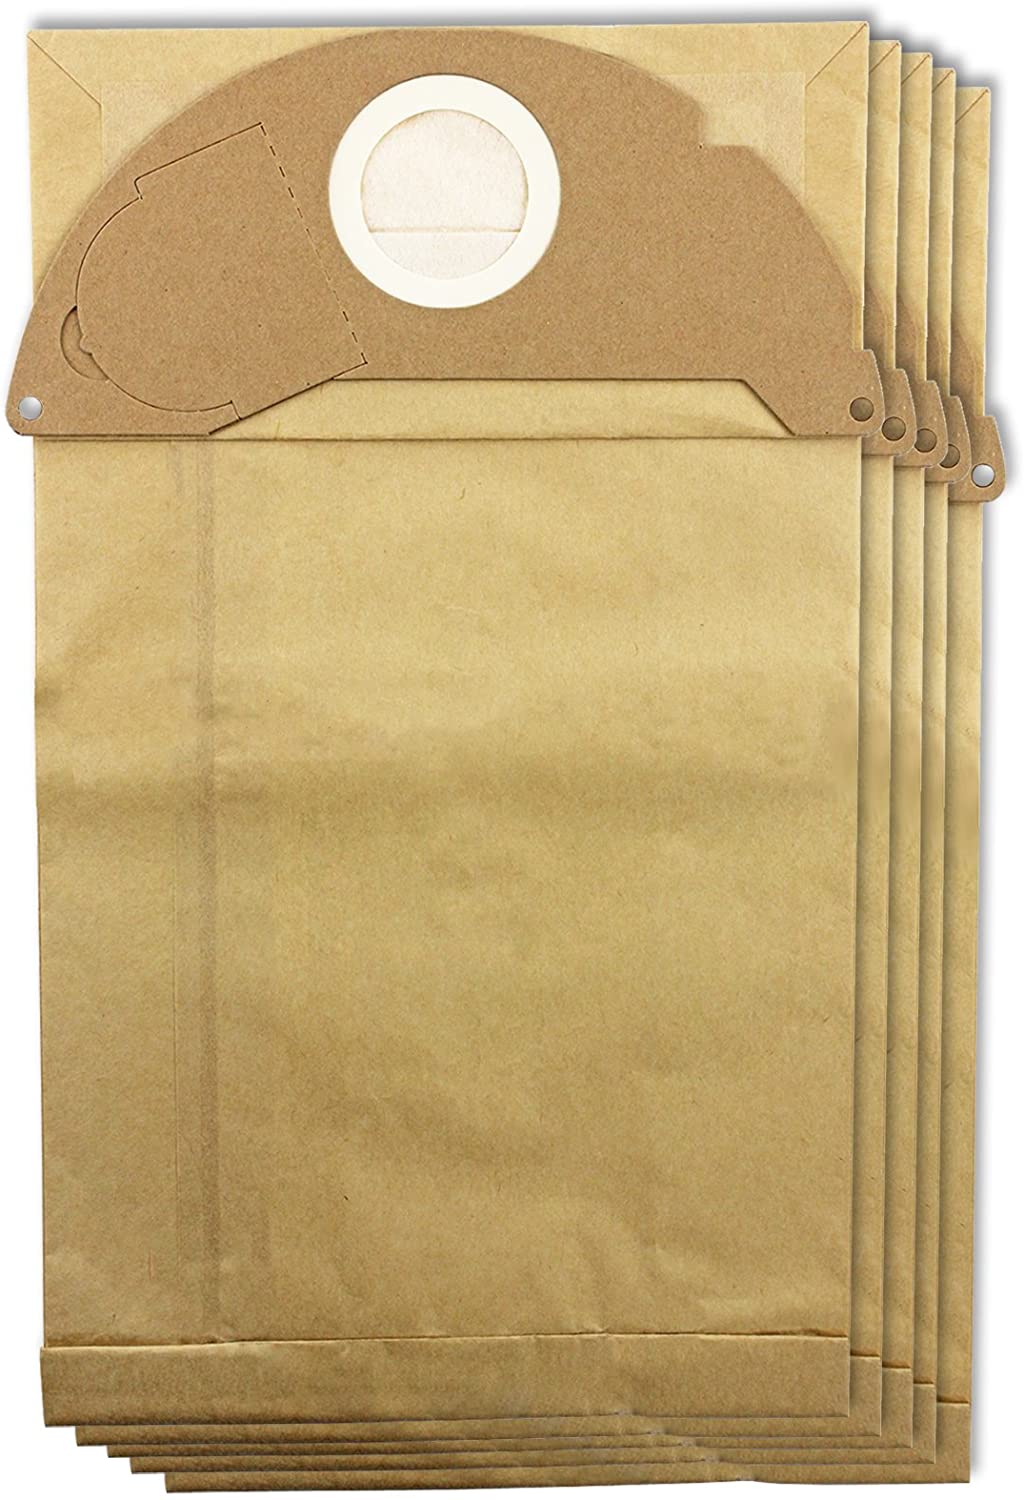 Strong Dust Bags for Karcher A2000 A2004 A2014 Vacuum Cleaners (Pack of 5)